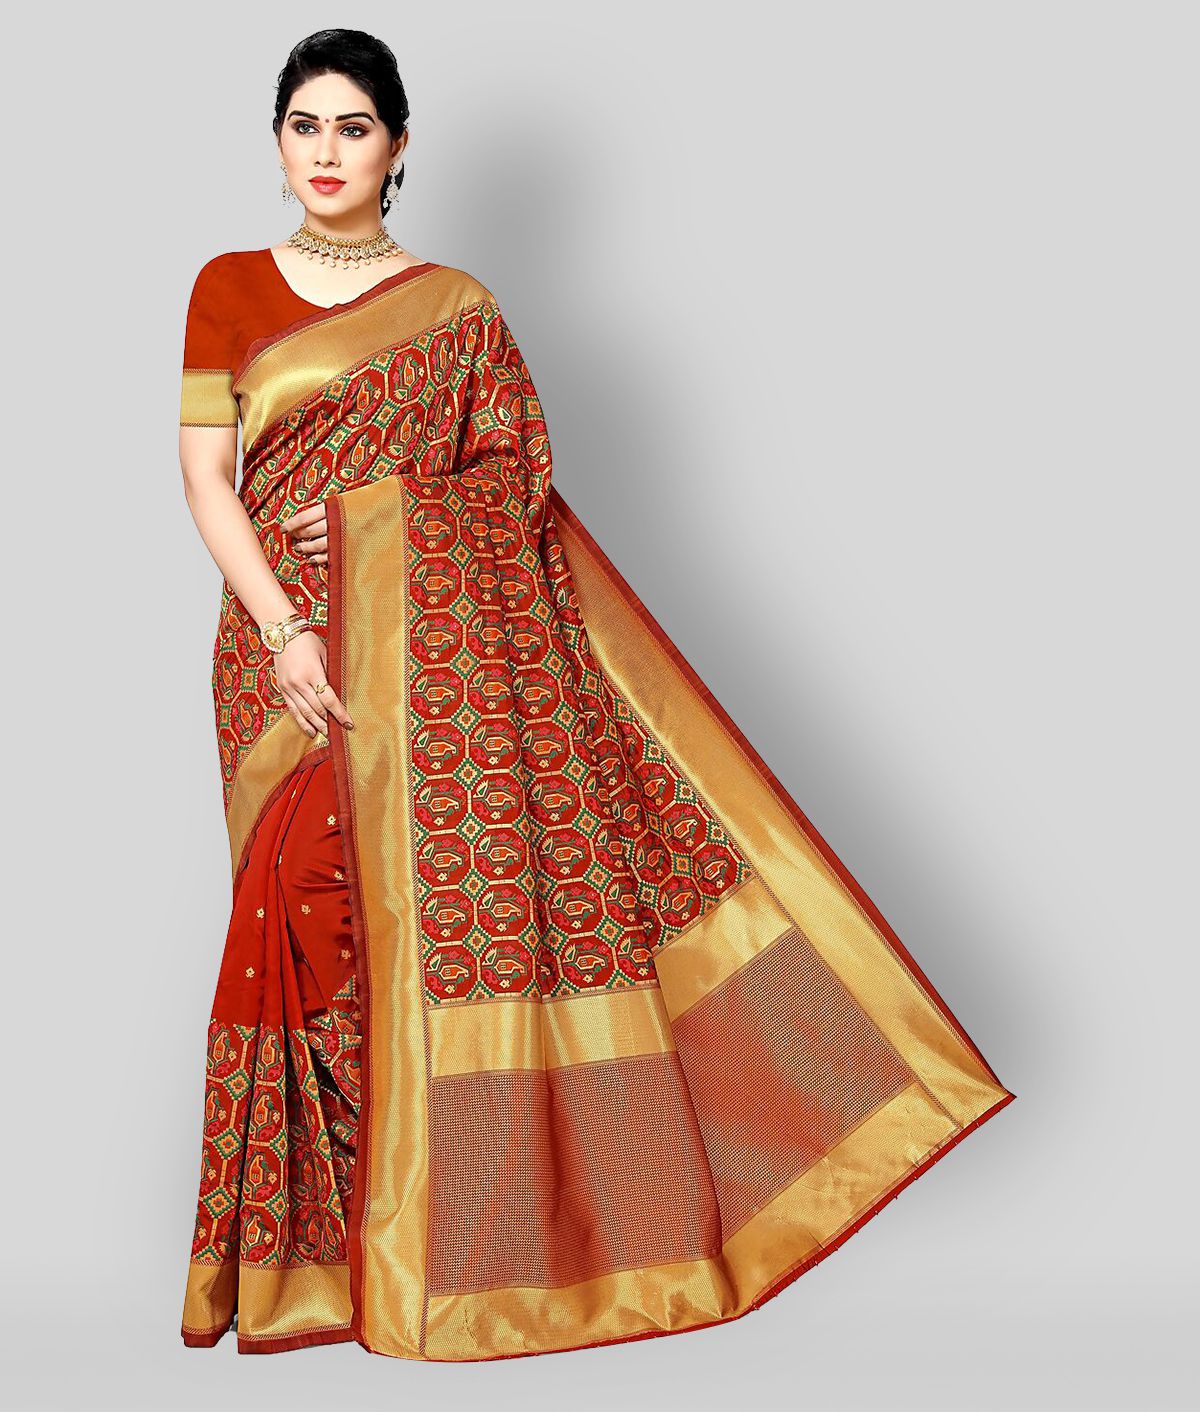     			NENCY FASHION - Multicolor Banarasi Silk Saree With Blouse Piece (Pack of 1)